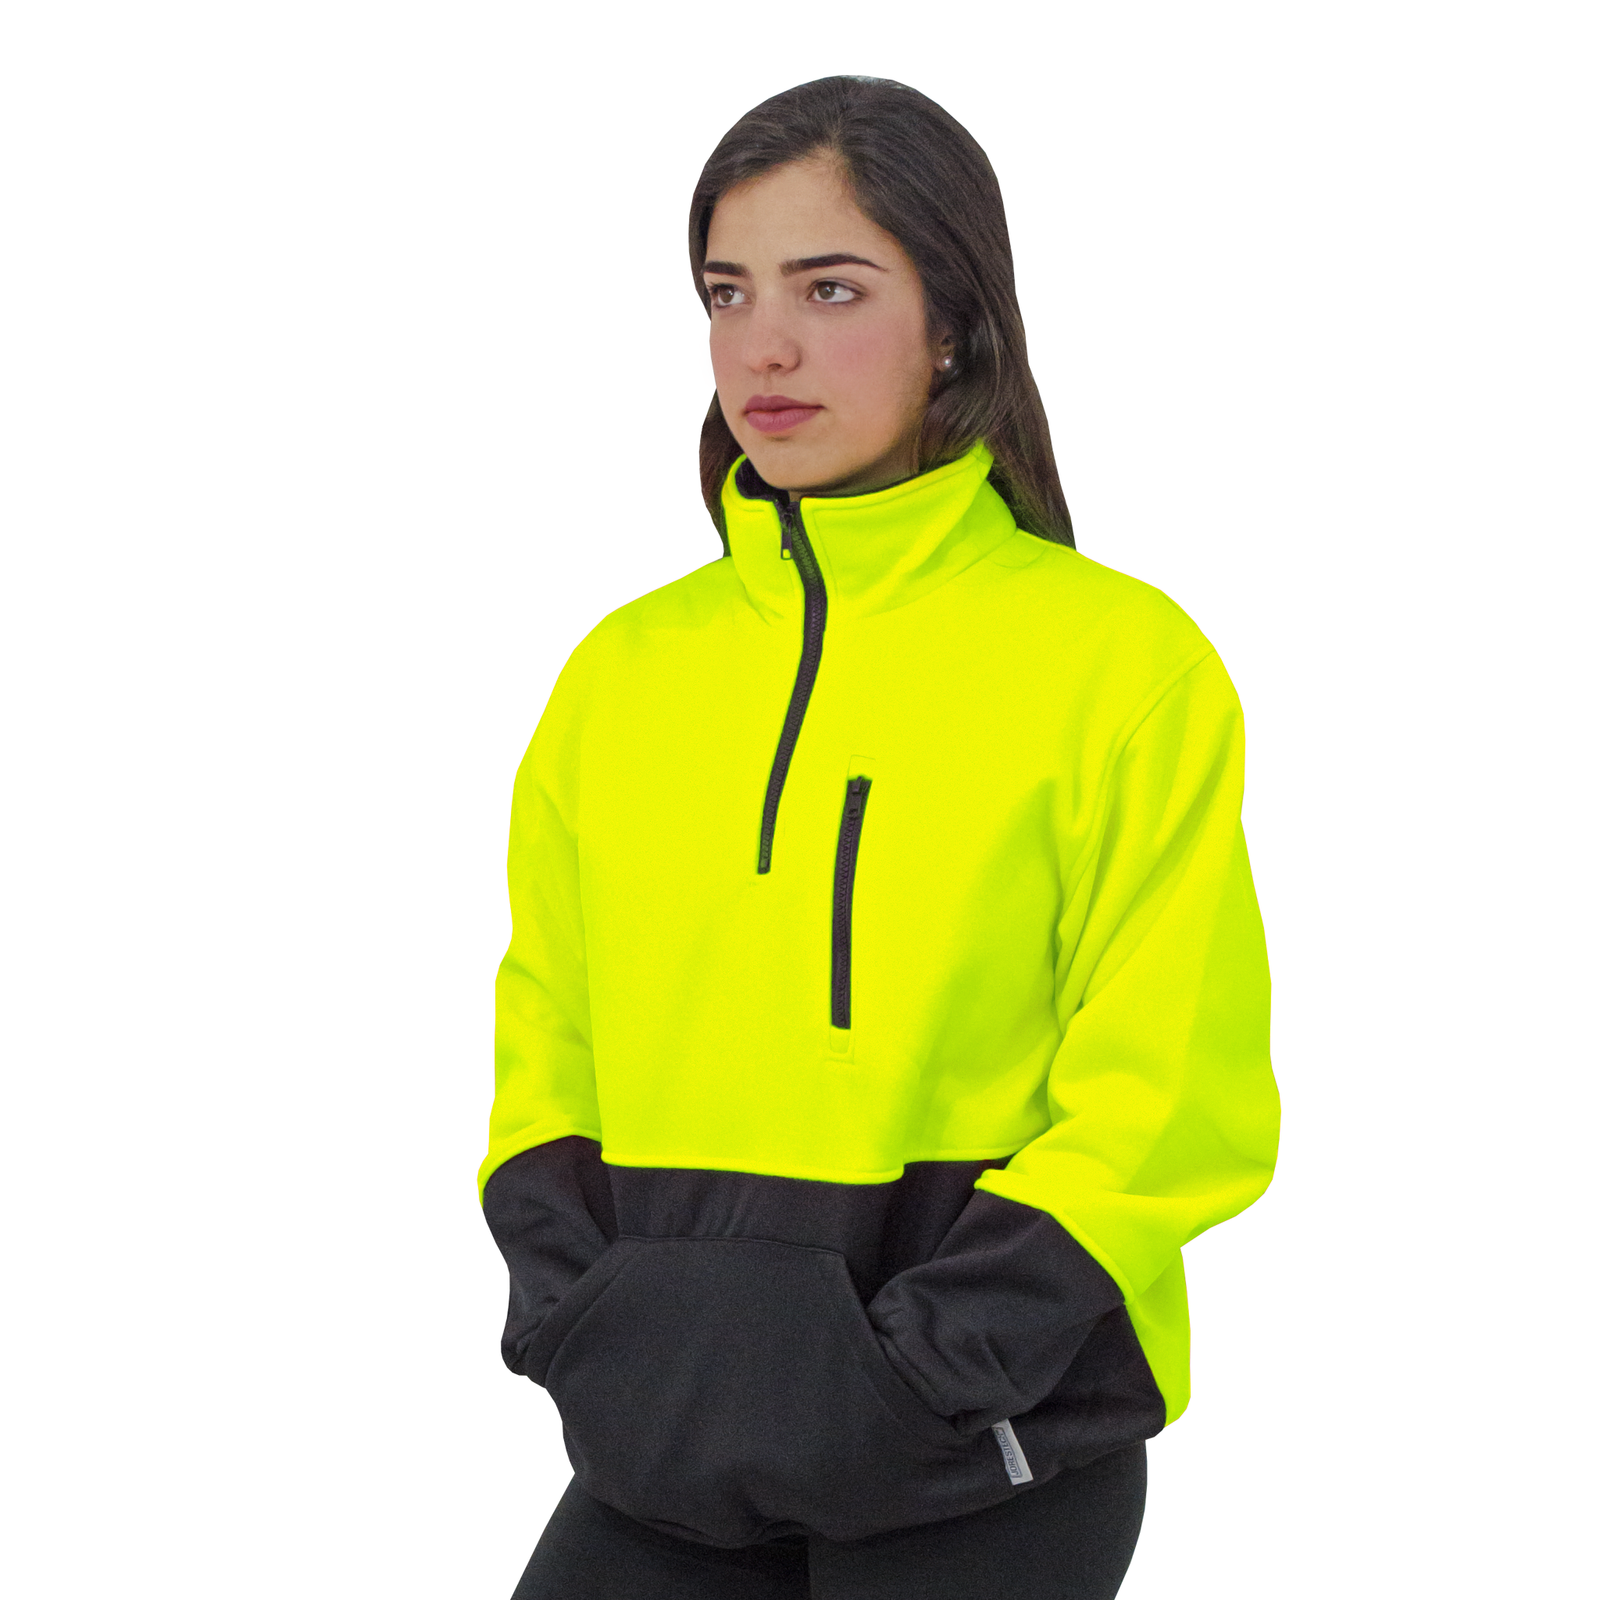 Woman wearing the hi-vis Yellow Black safety sweater. She had both hands inside the front pocket, and the zipper is closed all the way making the collar stand up.